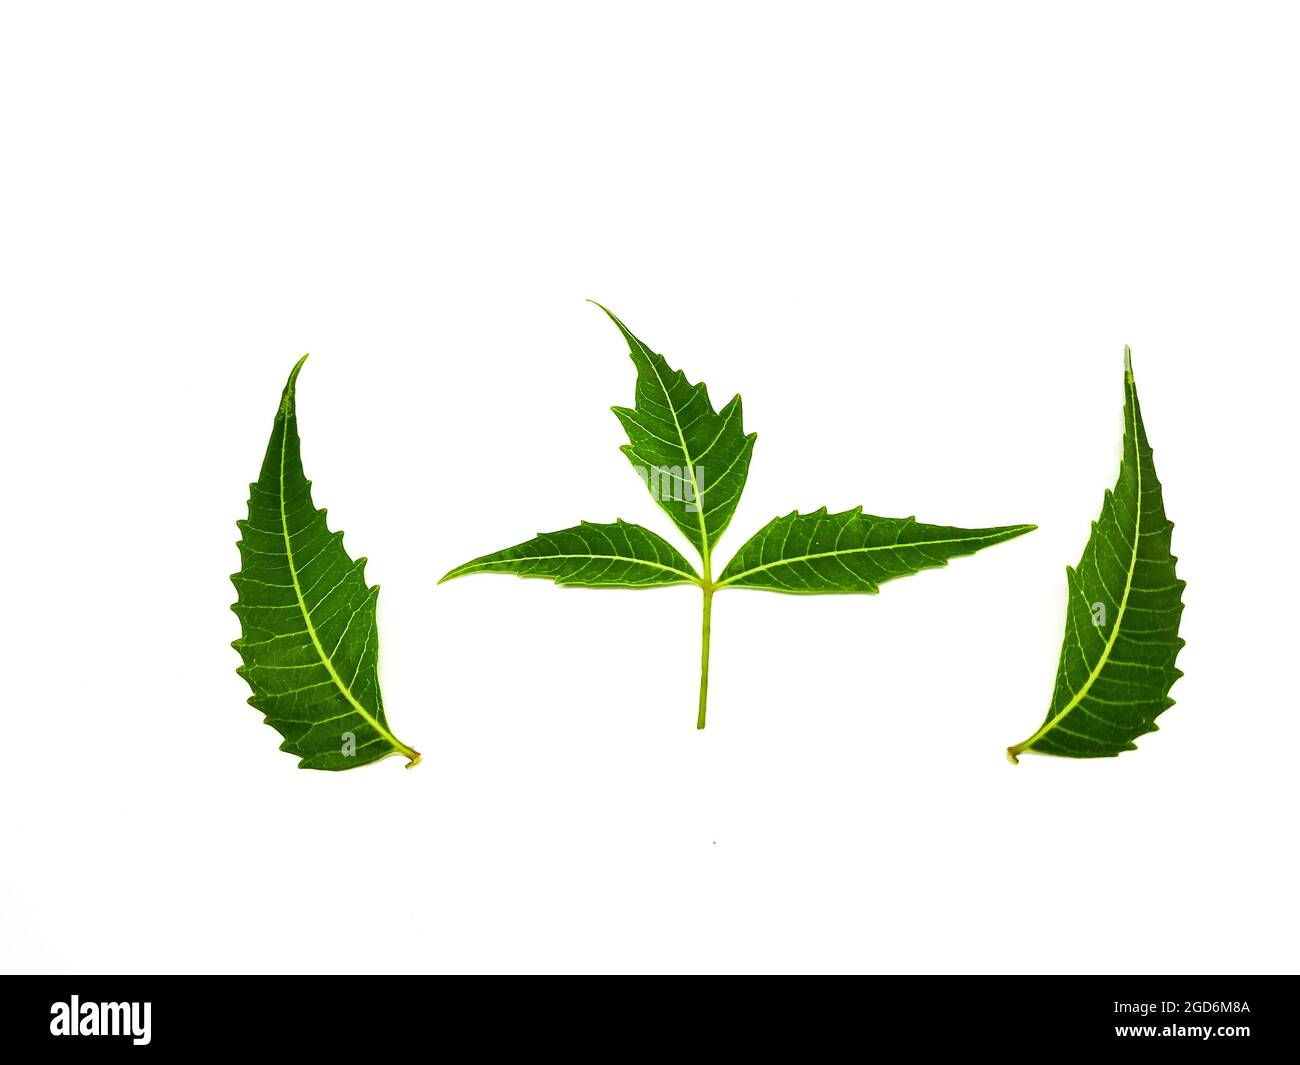 Azadirachta indica  A branch of neem tree leaves isolated on white background. Natural Medicine. Stock Photo